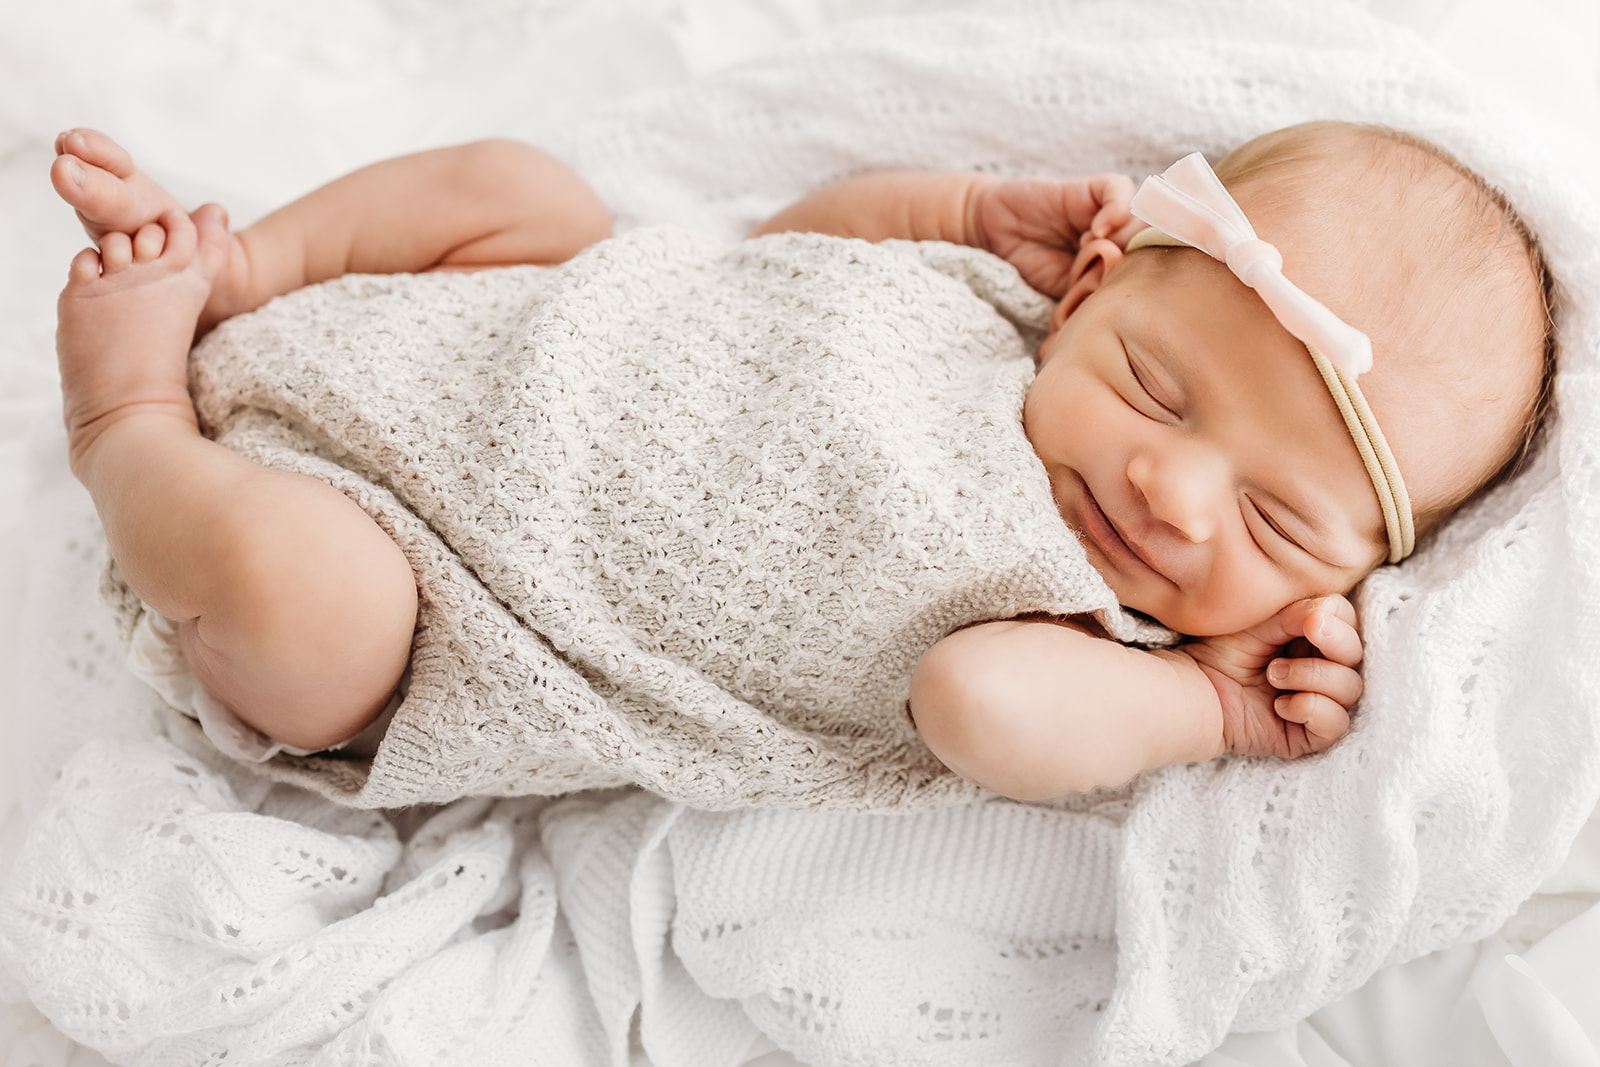 A newborn baby smiles in her sleep on a lace blanket in a knit onesie thanks to Beautiful Birth Doula